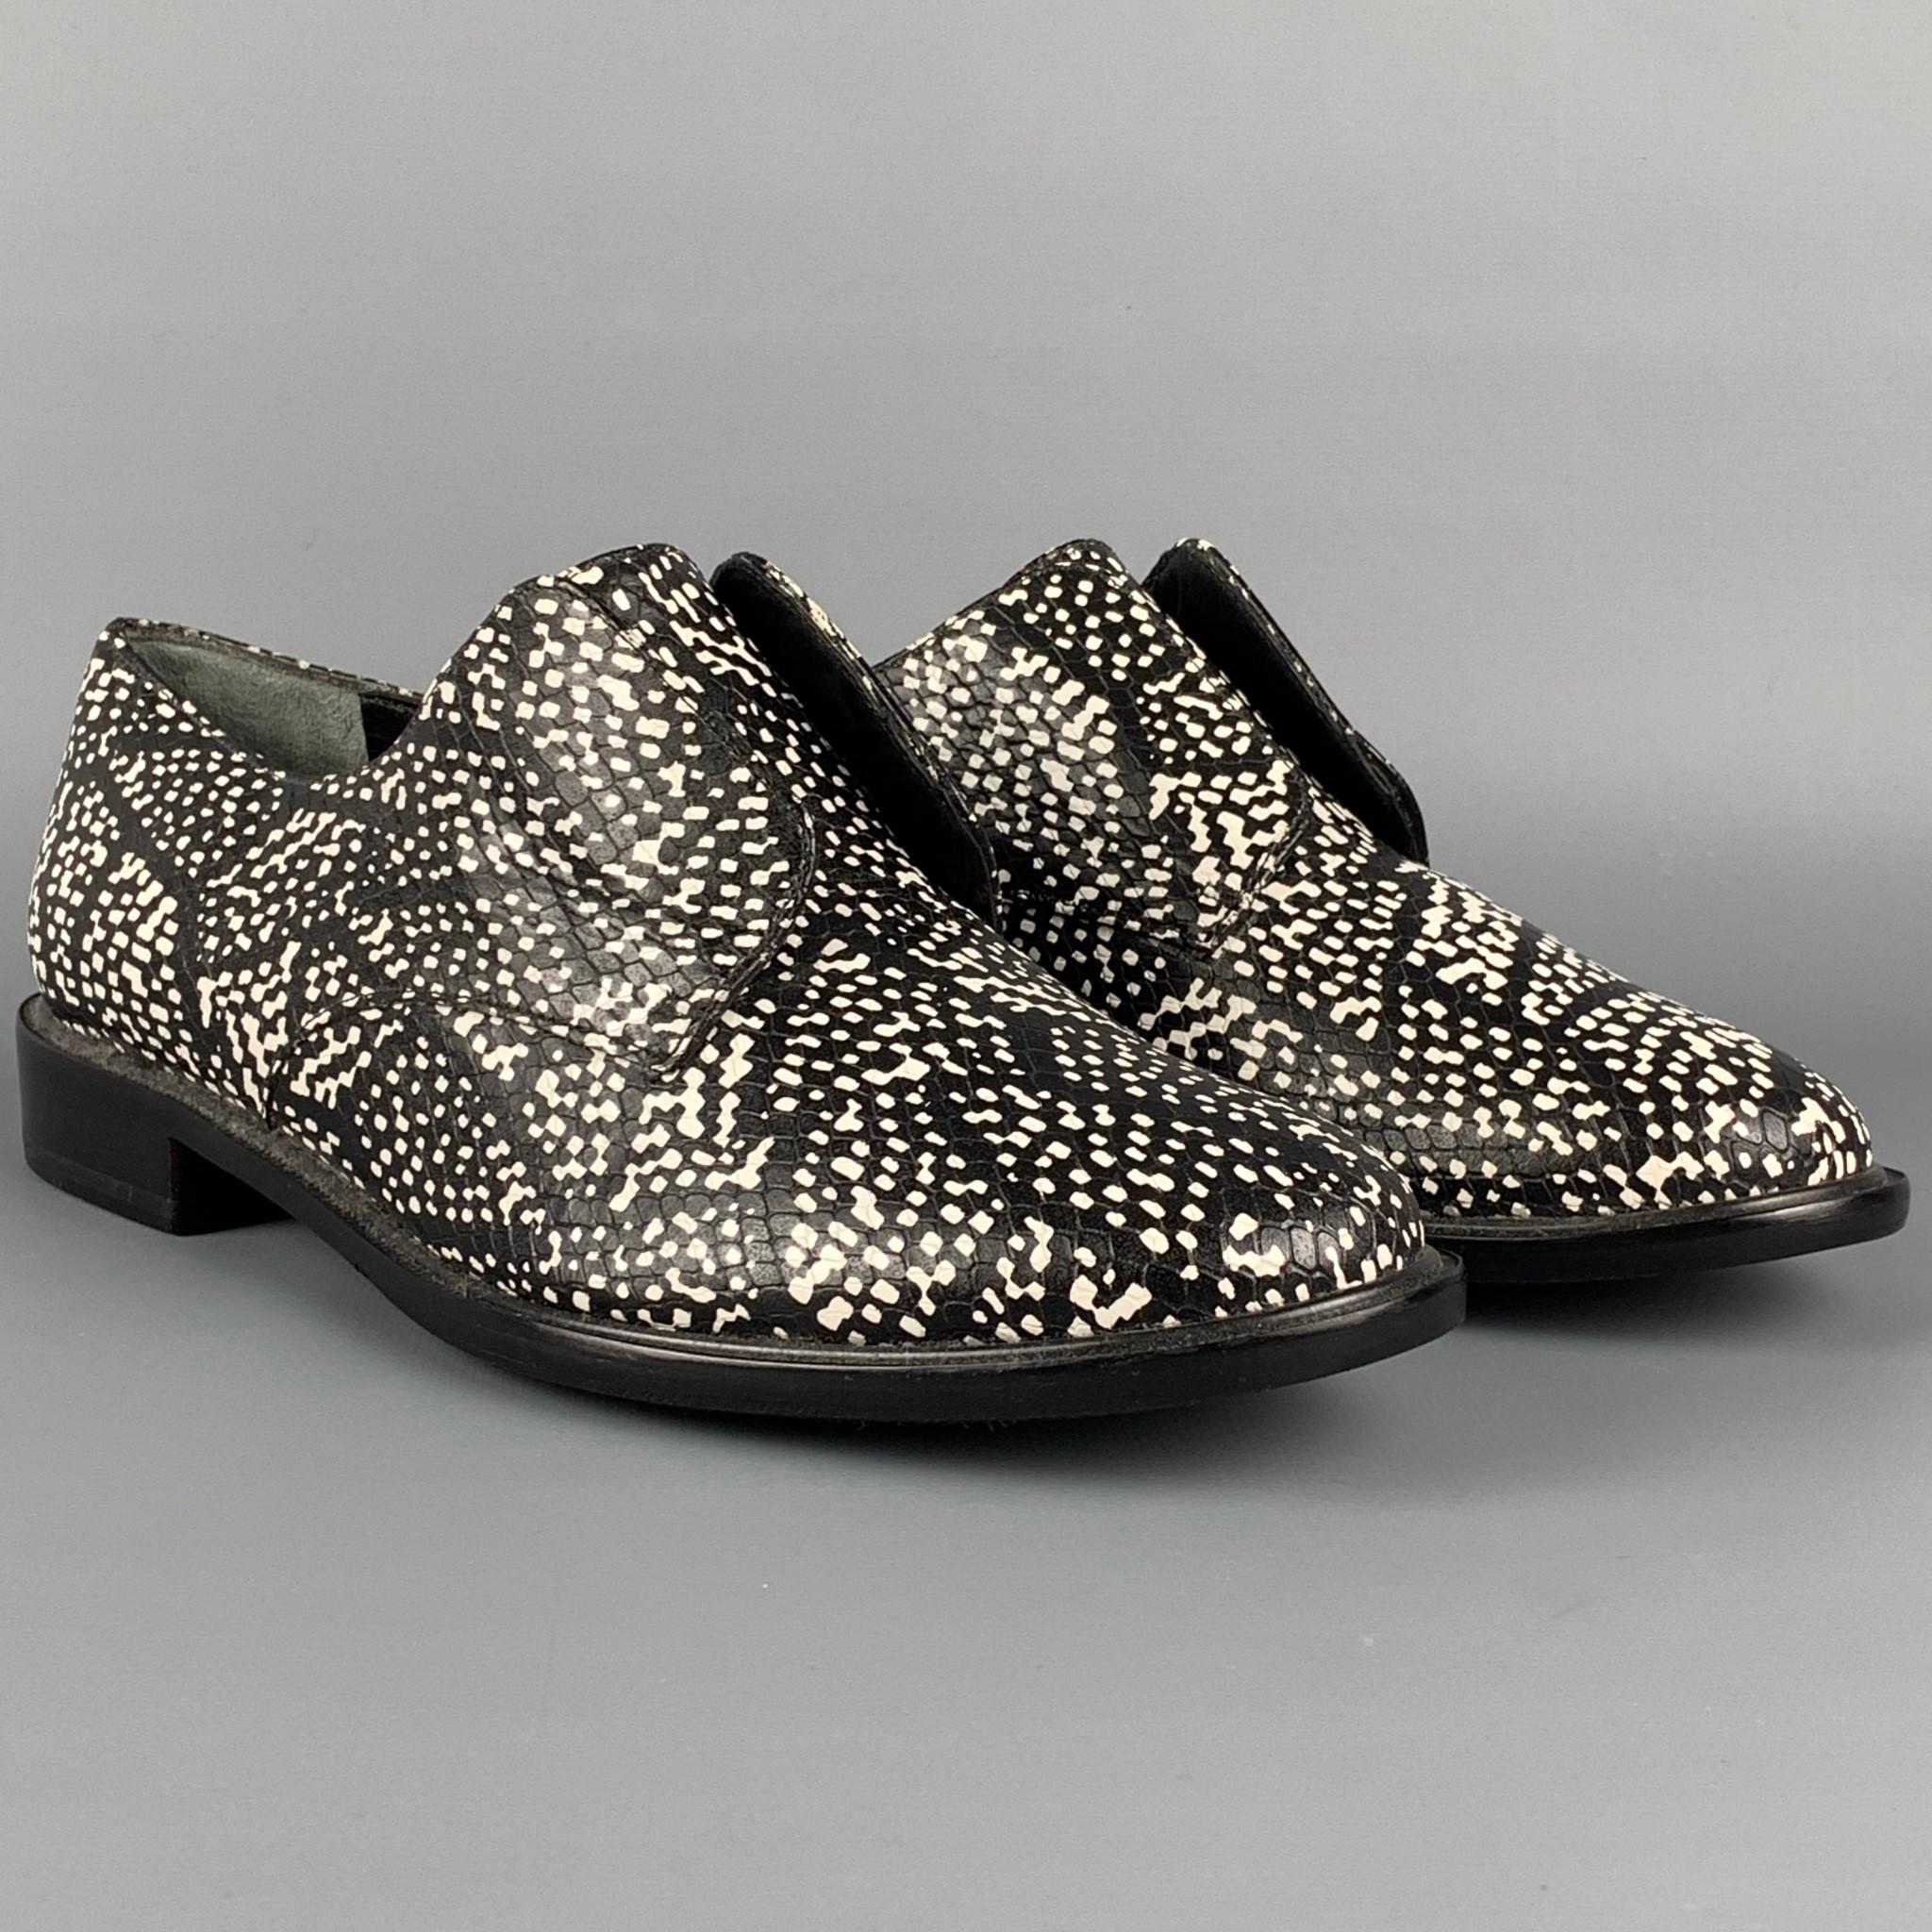 ROBERT CLERGERIE shoes comes in a black & white print leather featuring a laceless style. Made in France. 

Very Good Pre-Owned Condition.
Marked: 37.5 B 04 7007 25

Outsole: 10.5 in. x 3.75 in. 